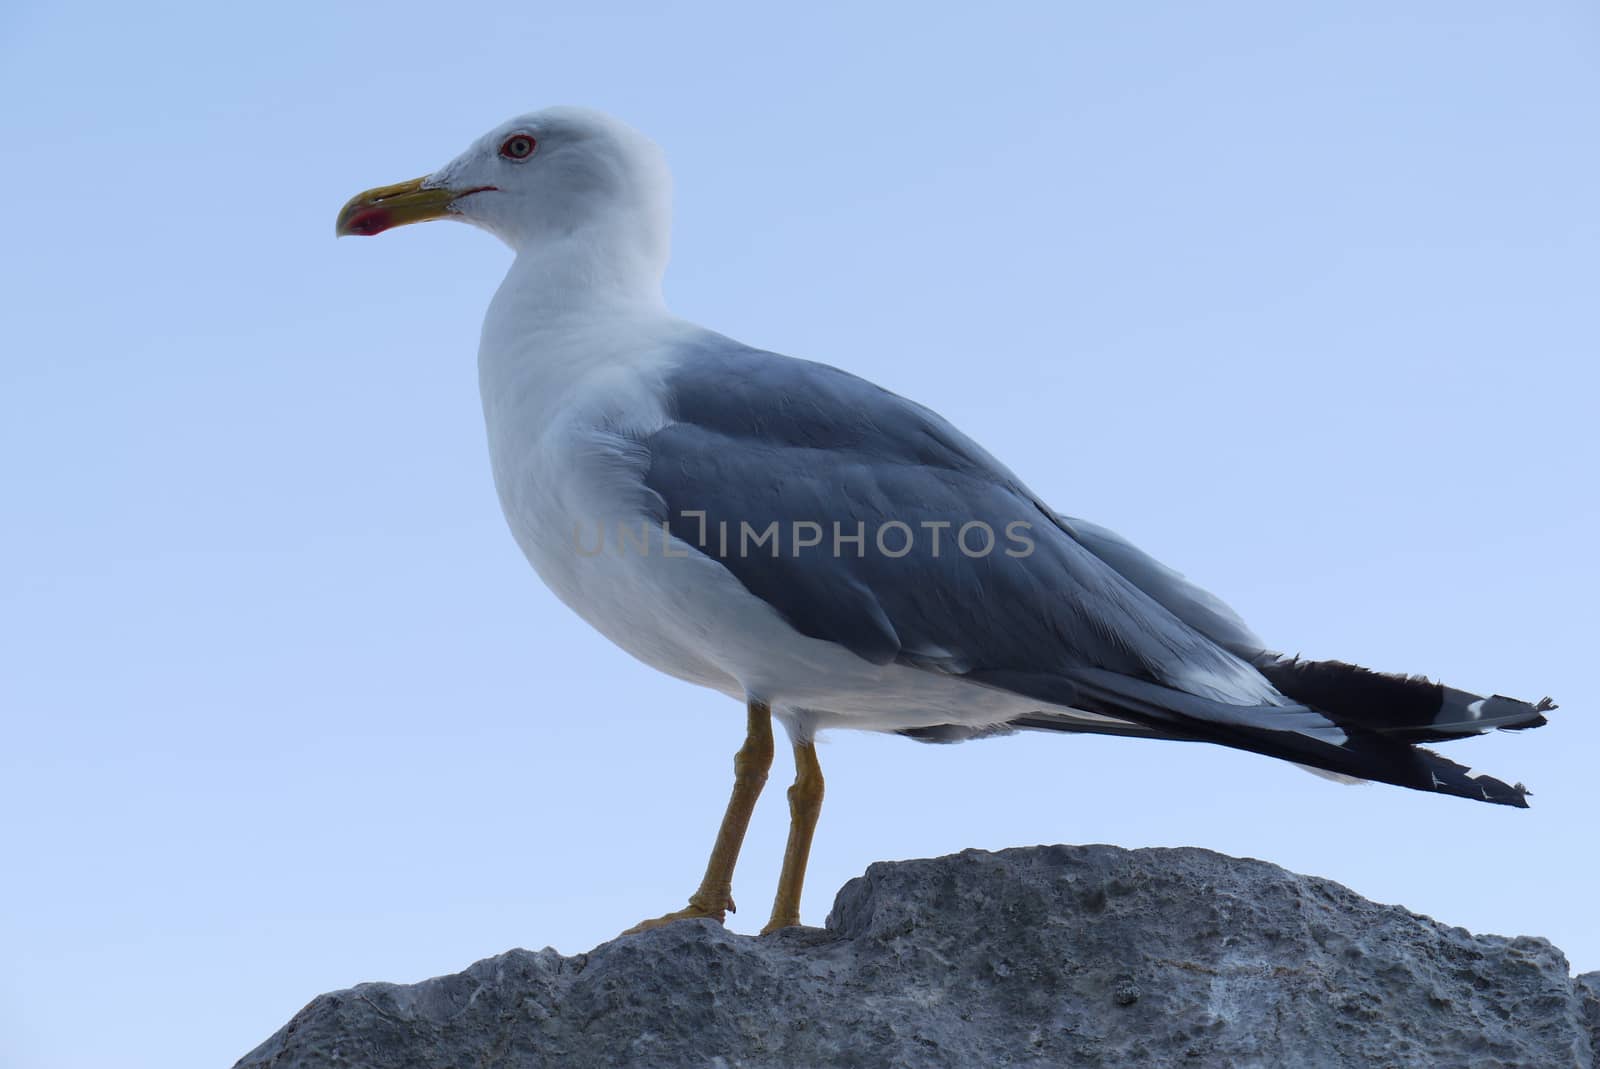 white gull with gray wings on top of a rock on the background of blue sky by Adamchuk